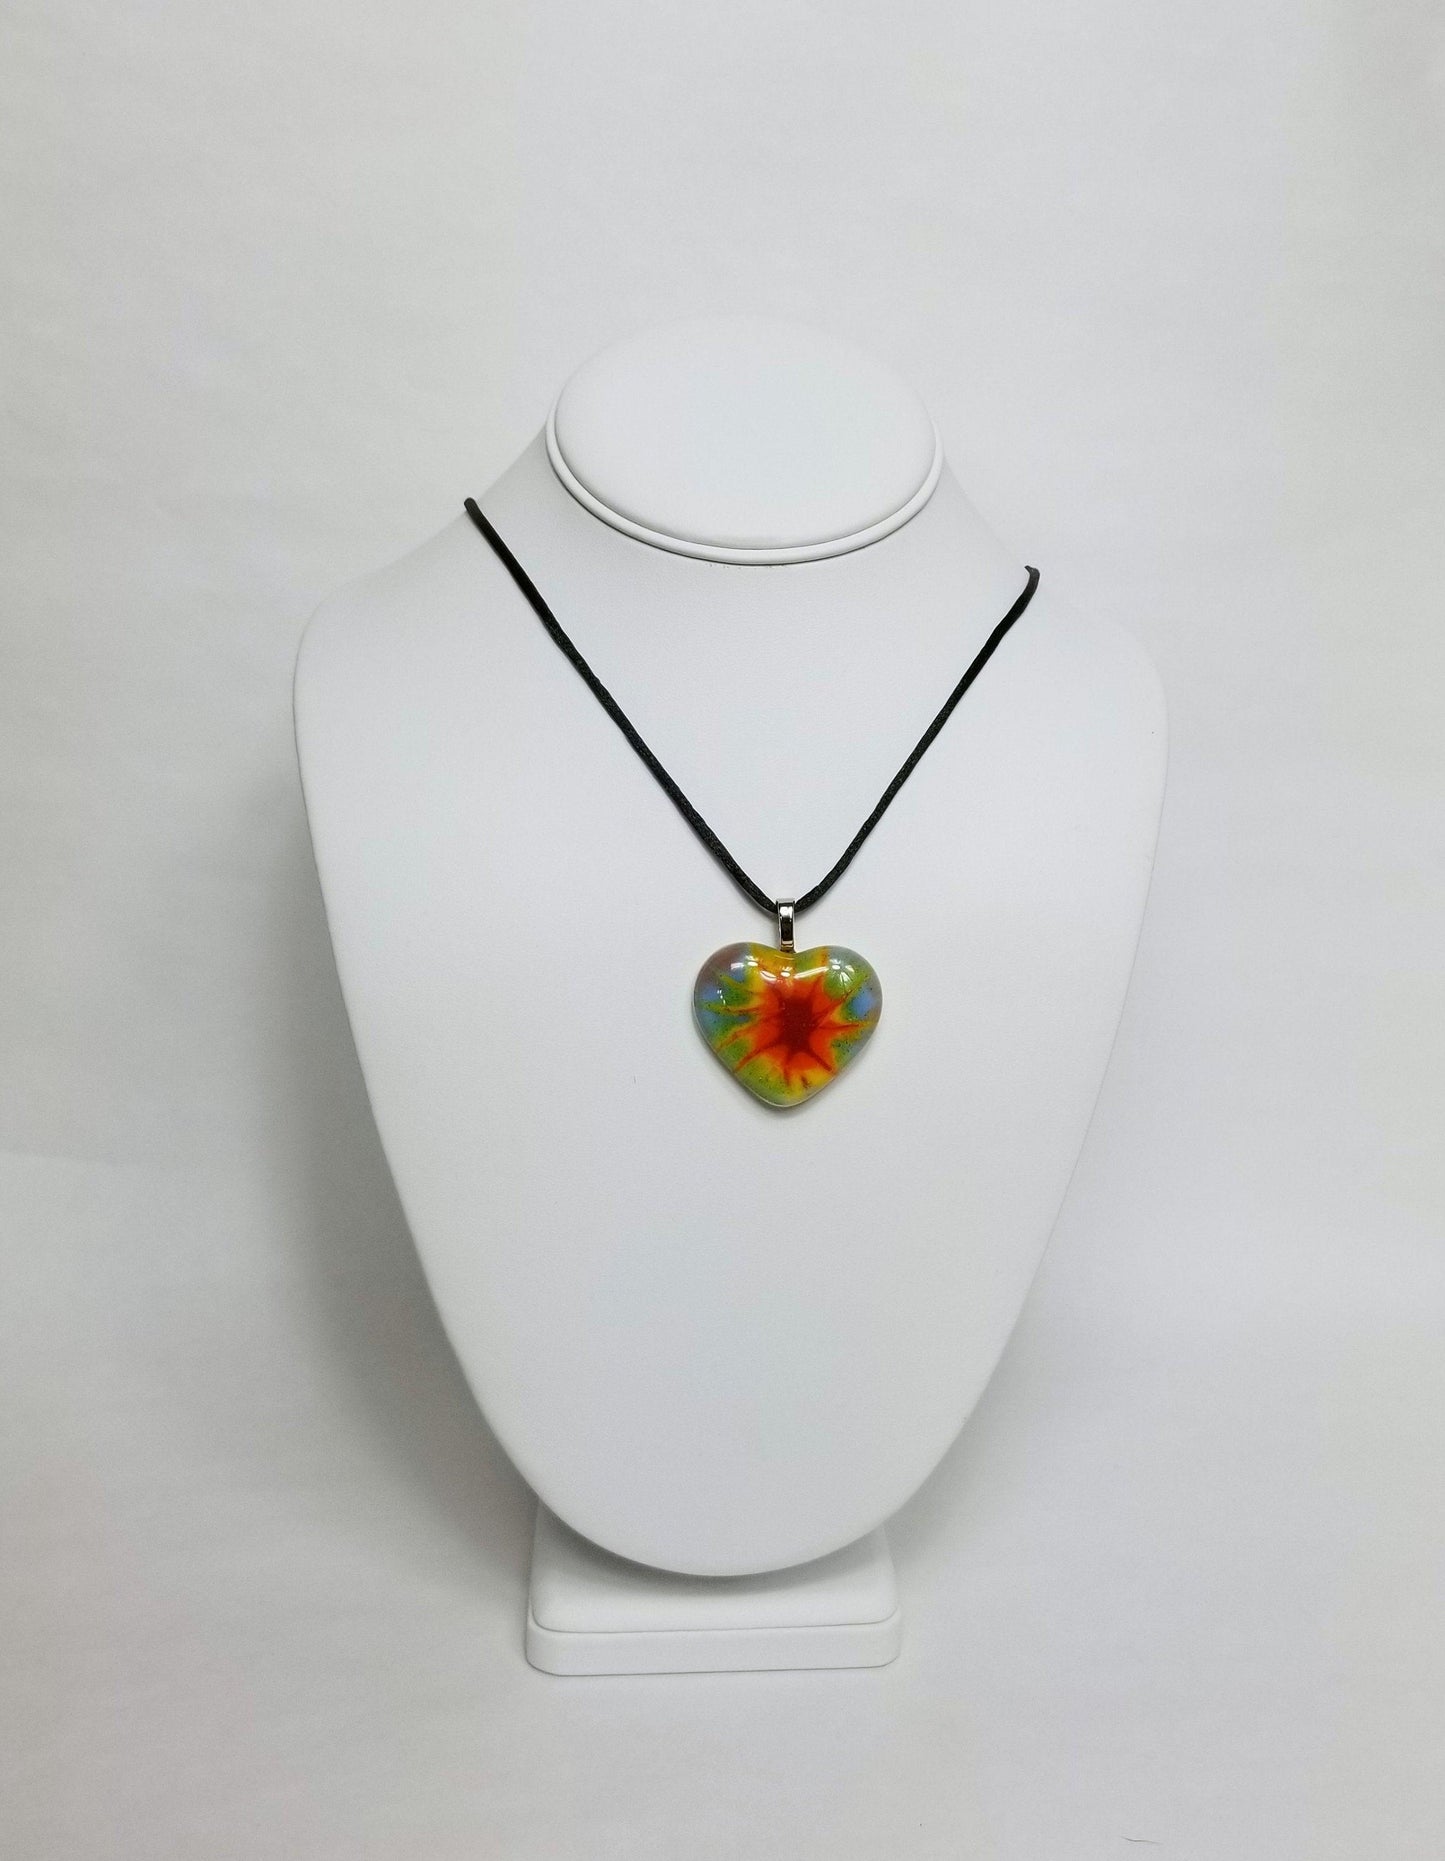 Tie Dye look fused glass Heart necklace, rainbow color